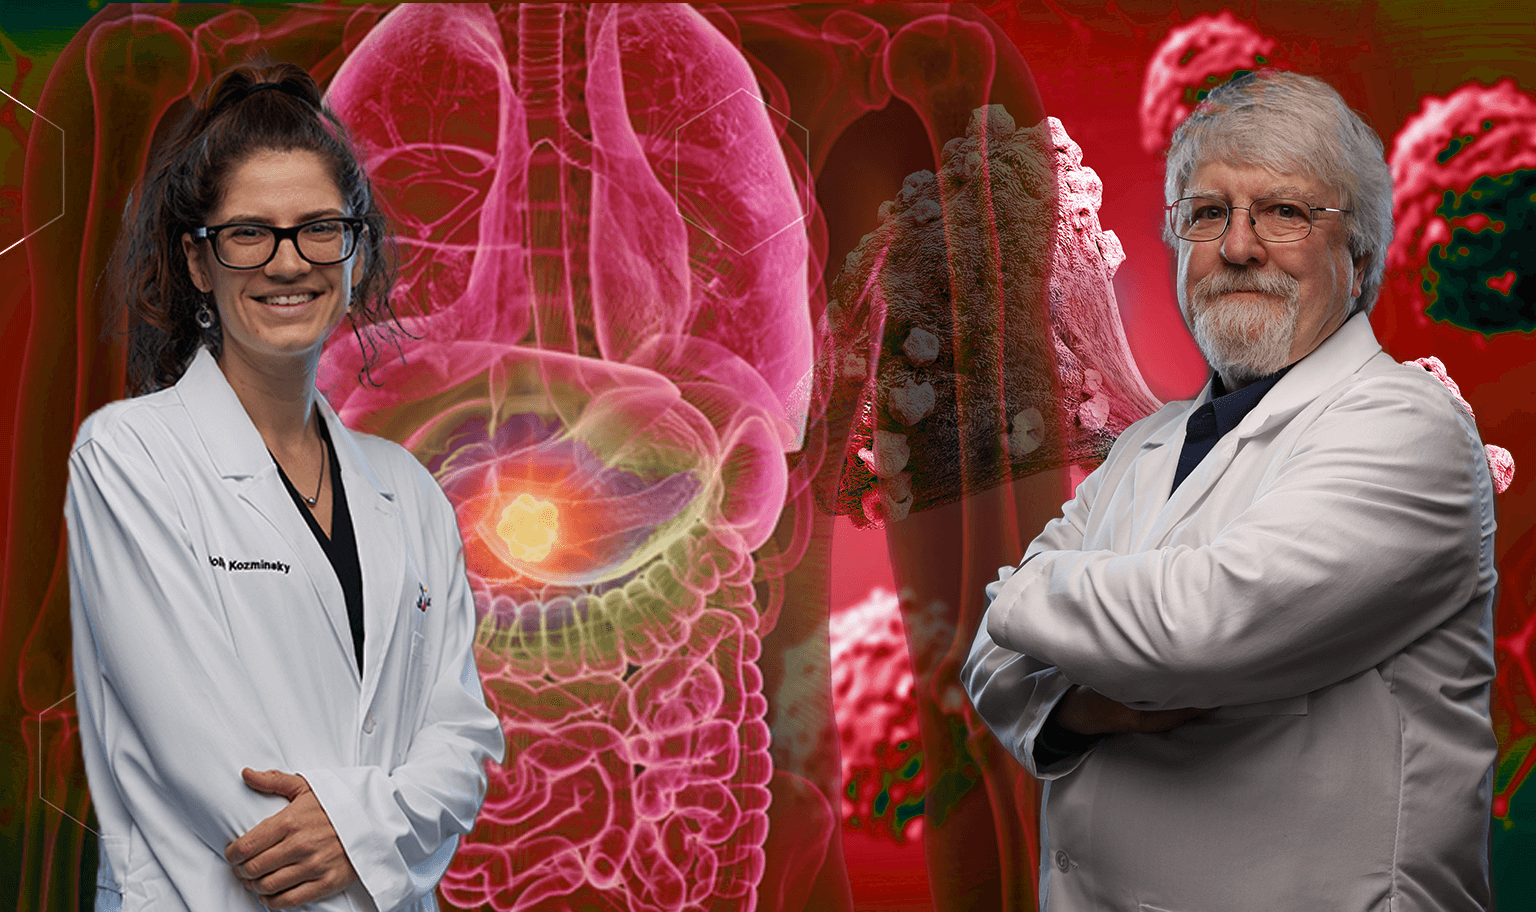 Iowa State Researchers Receive 2023 Barry Award to Investigate Cellular Structure of Pancreatic Cancer Tumors, Improve Treatment Outcomes